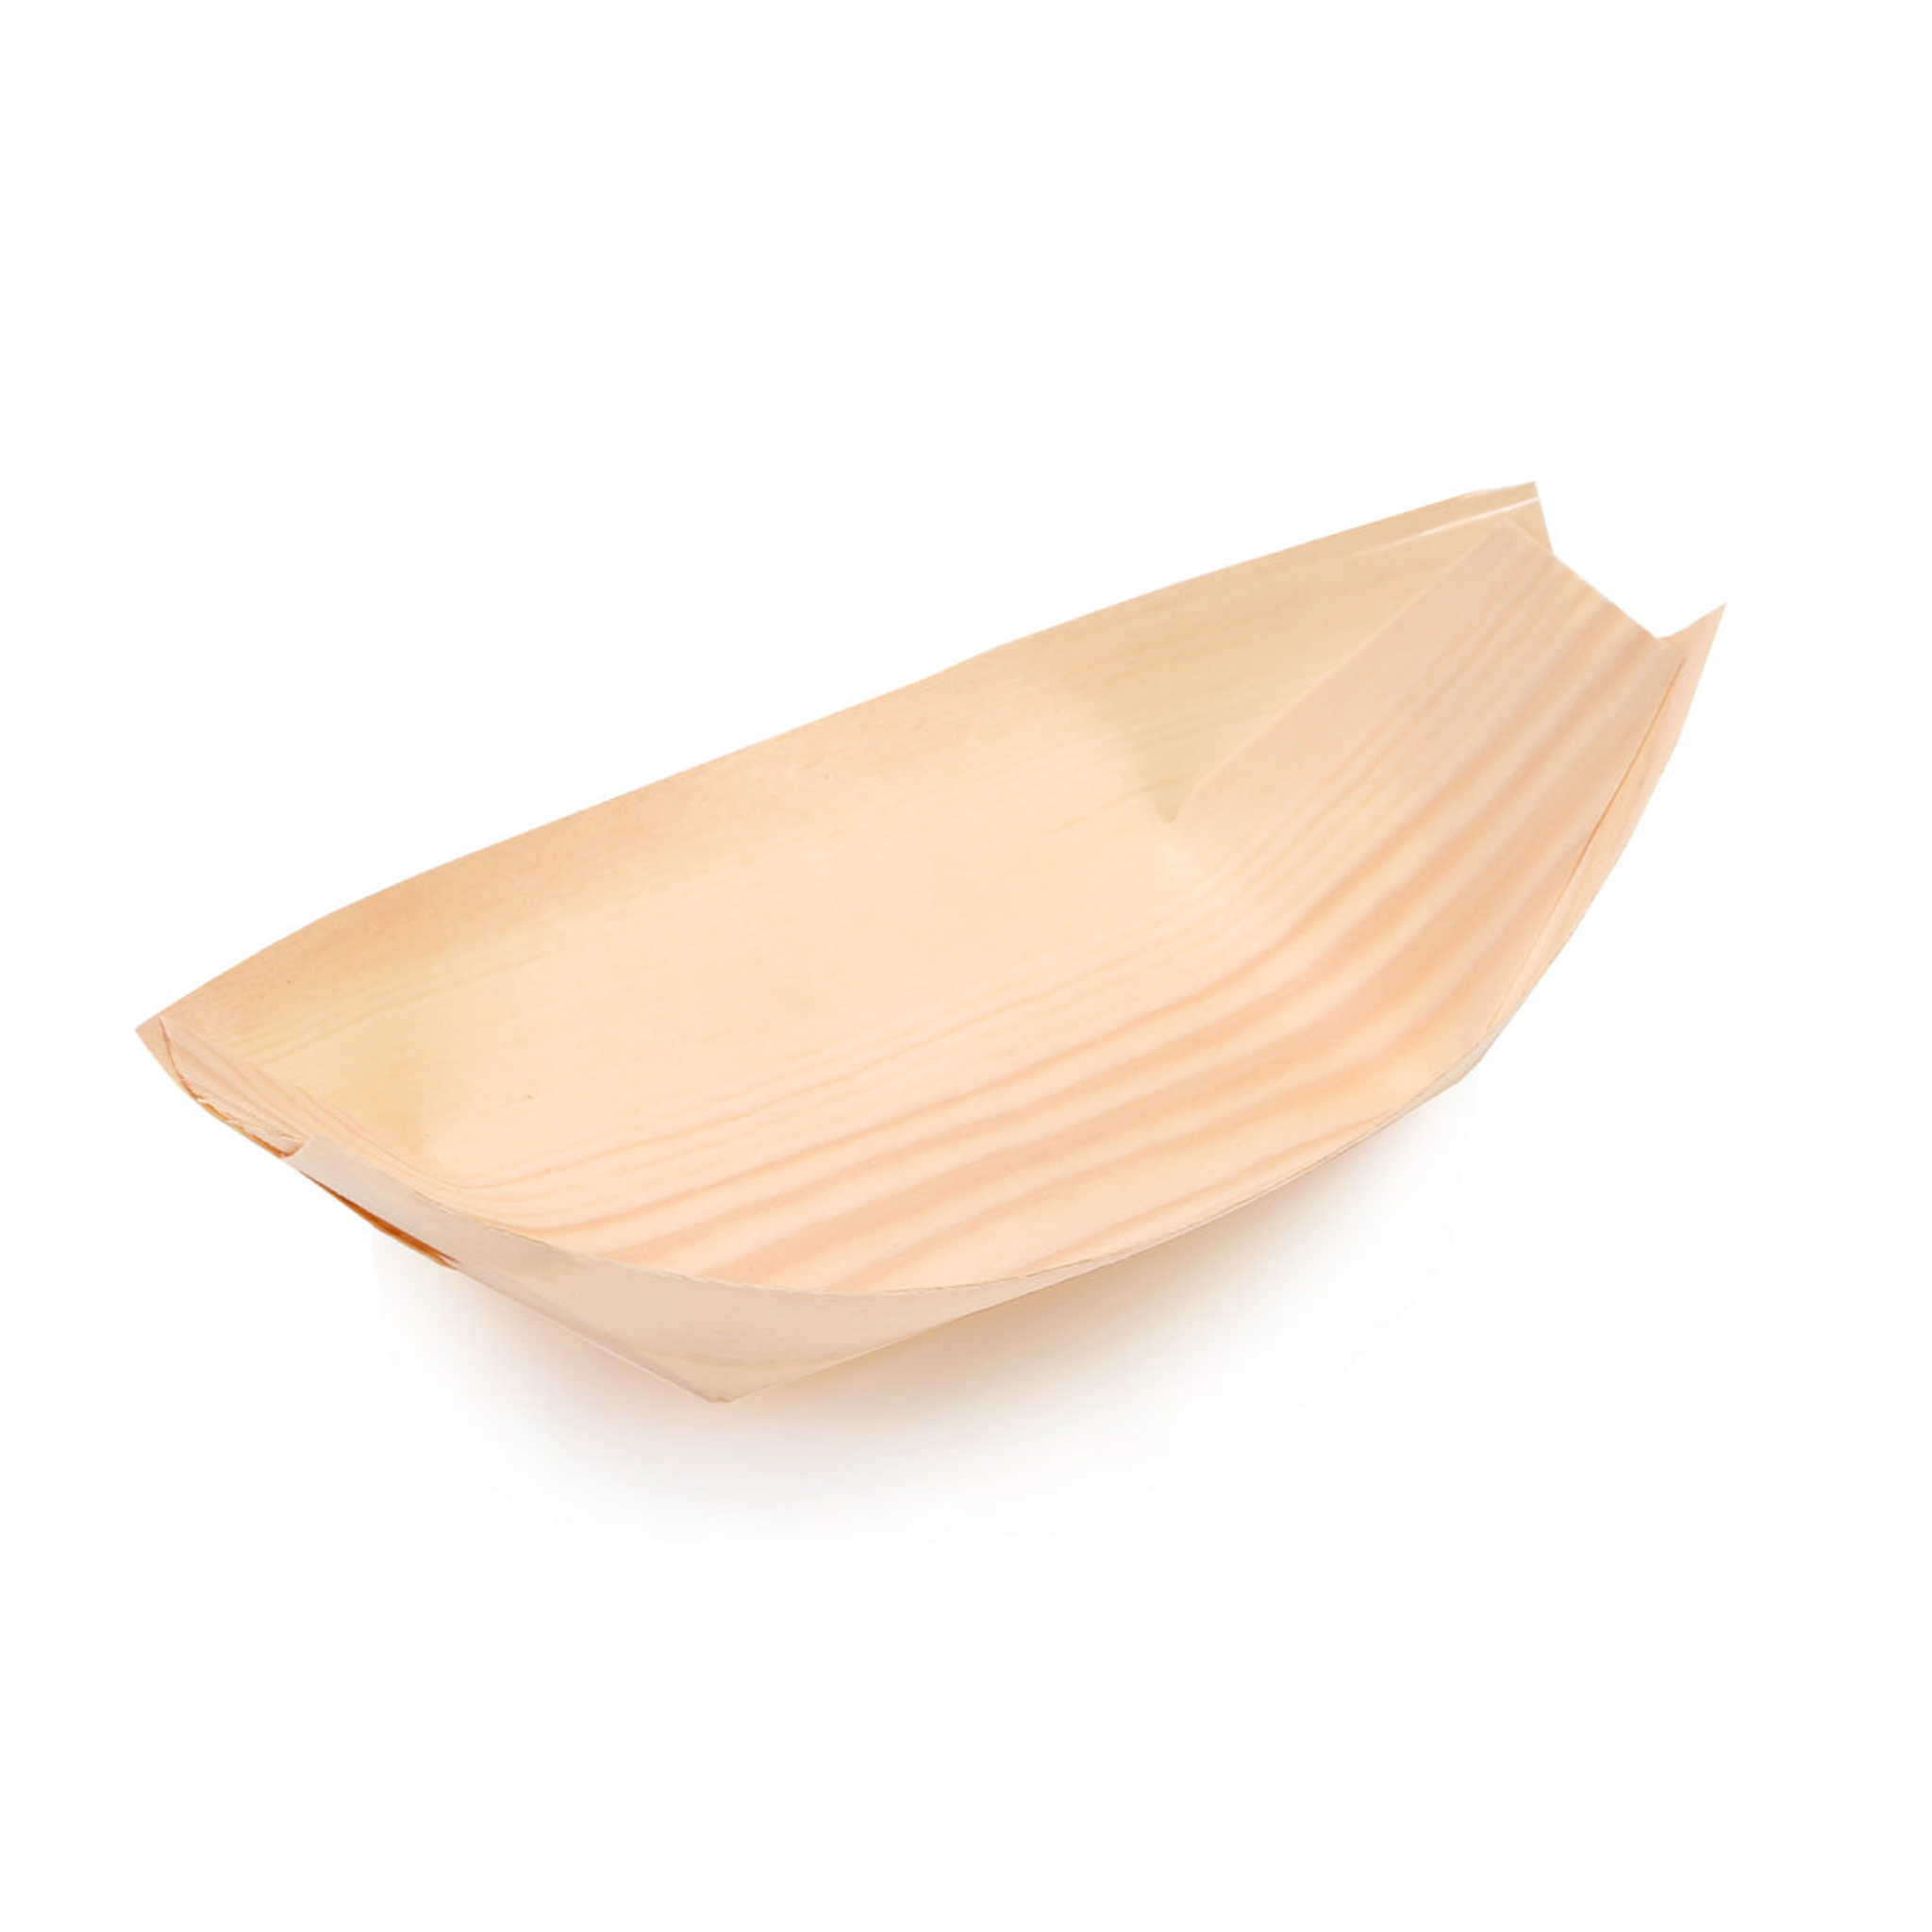 Bamboo Serving Boat Tray Disposable 8x13cm 20pack